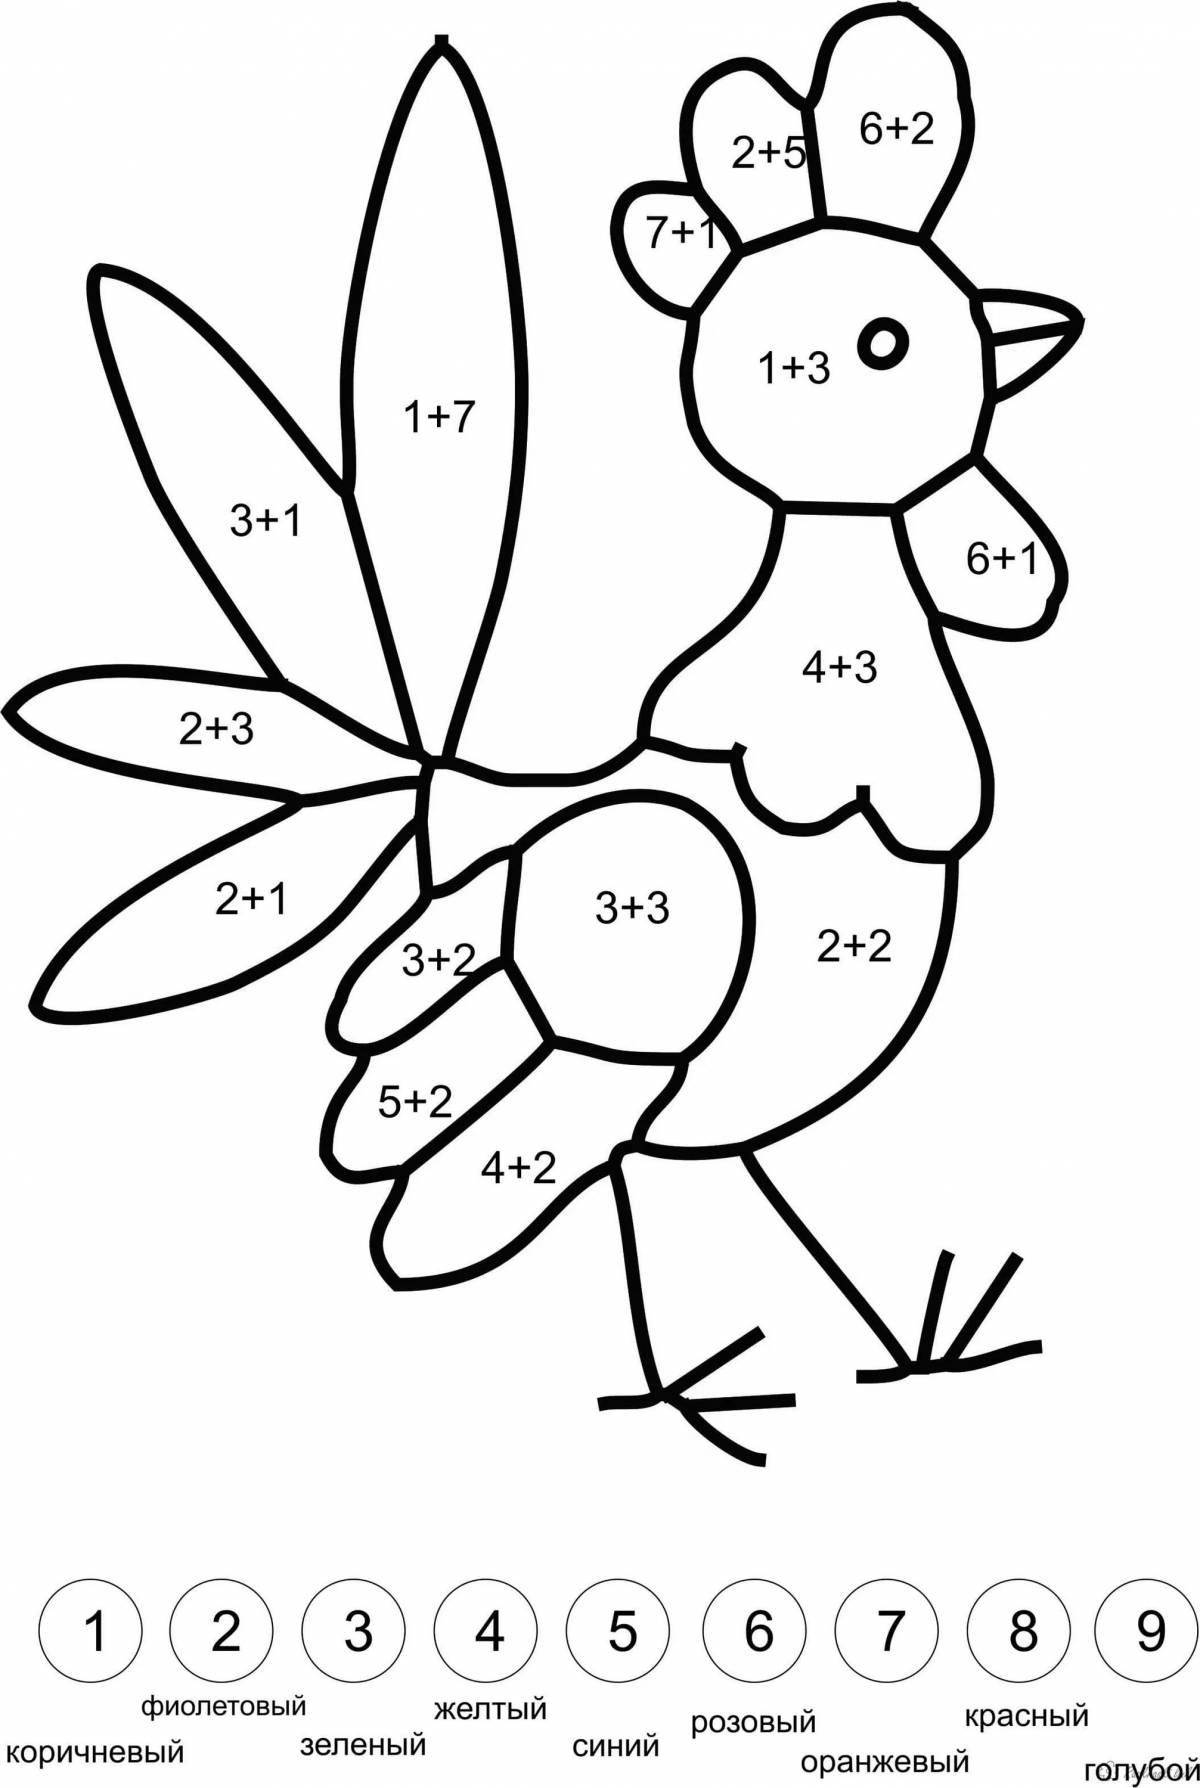 Creative math coloring book for 7-8 year olds